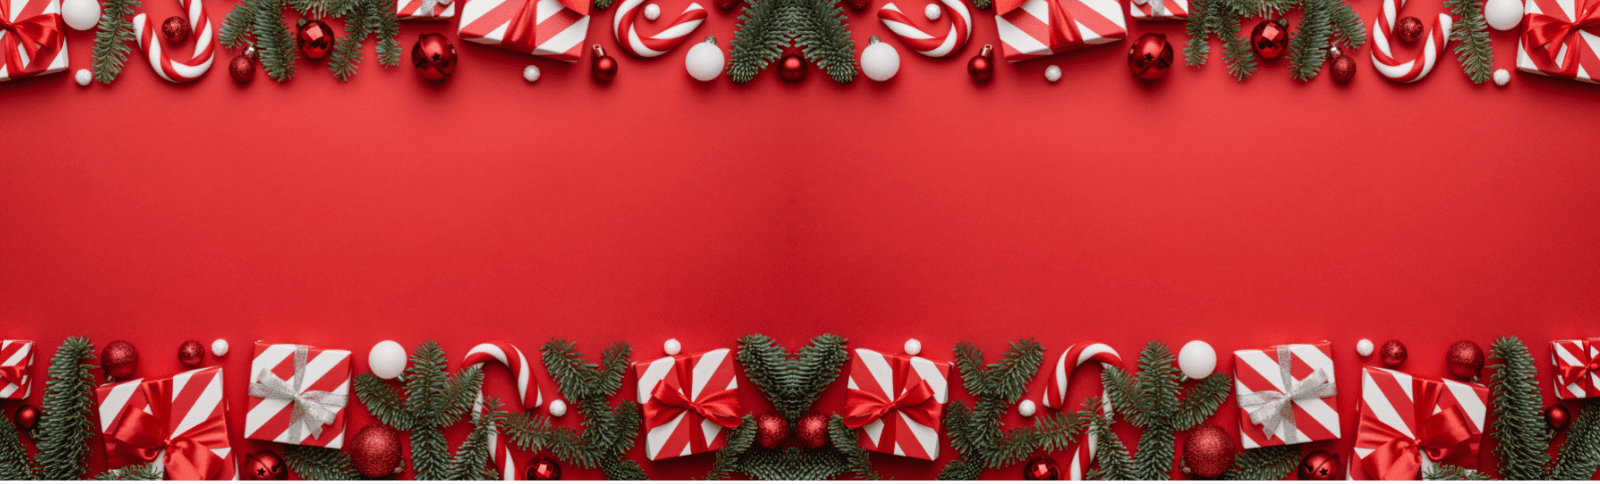 12 Things Marketers Want for Christmas